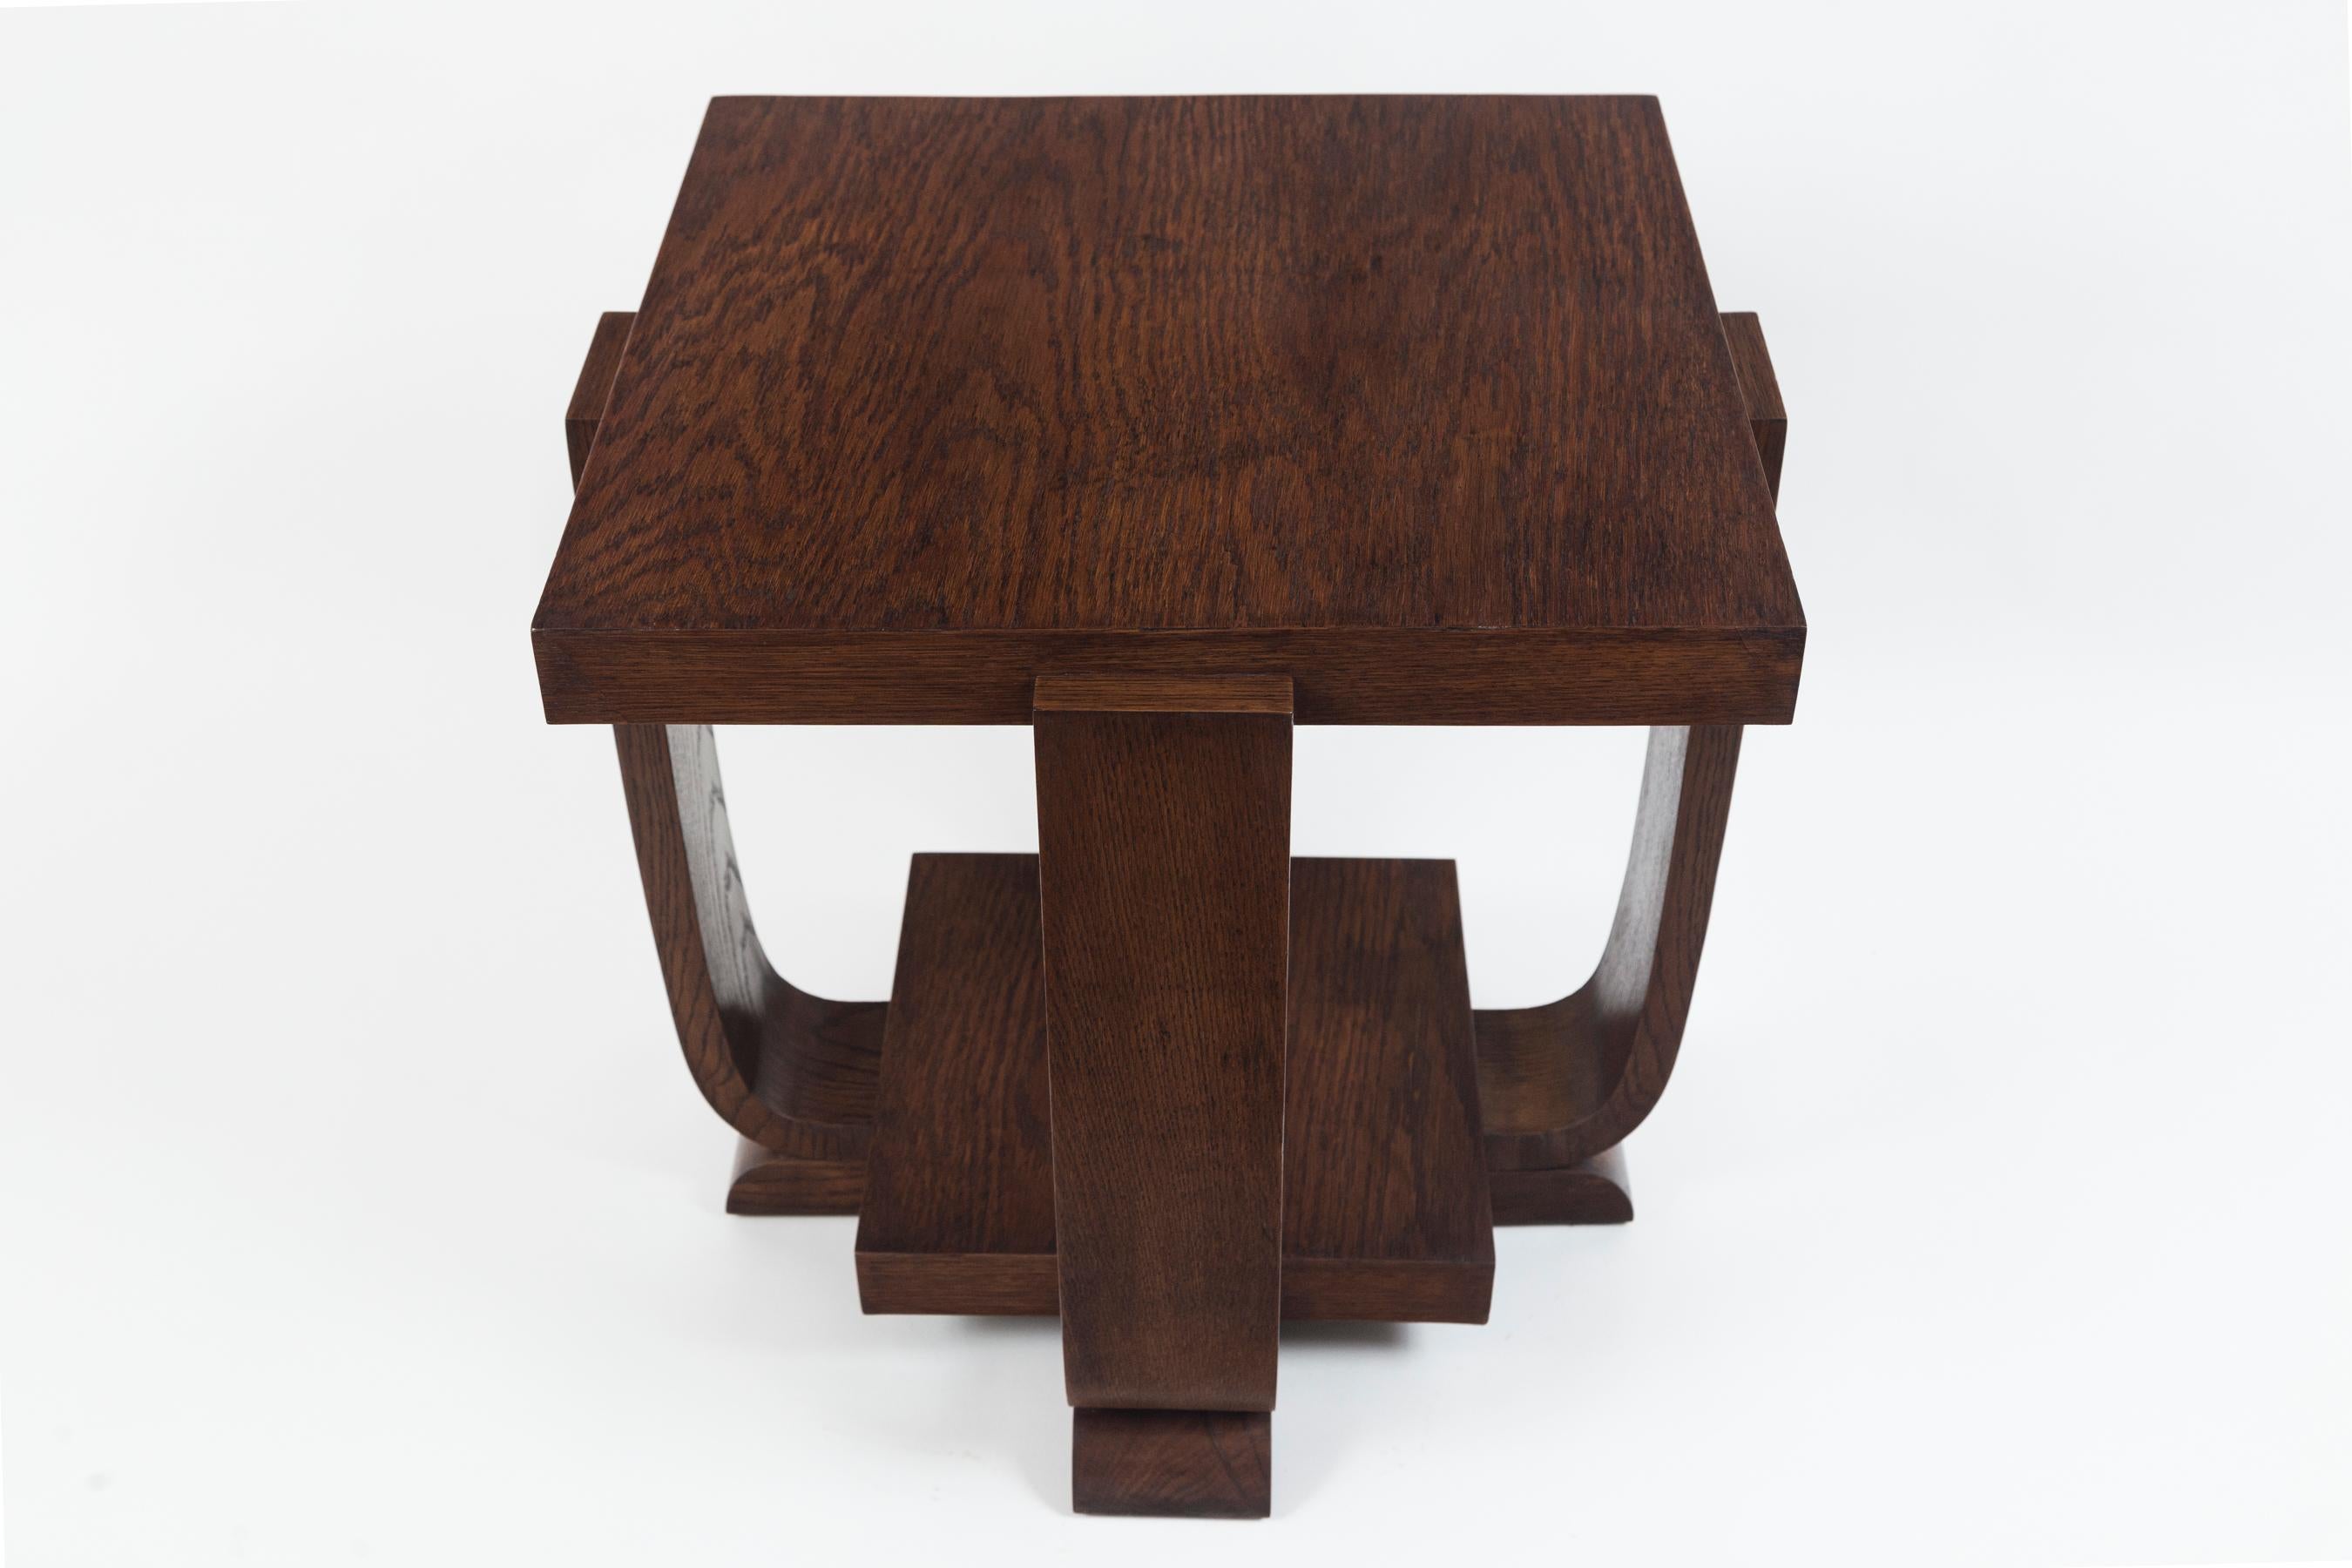 Lovely Modernist square two-tiered table with strong and simple geometric forms 
Date: 1940ca
Origin: France
Dimension: 19 3/4? square, 21 1/2? high.